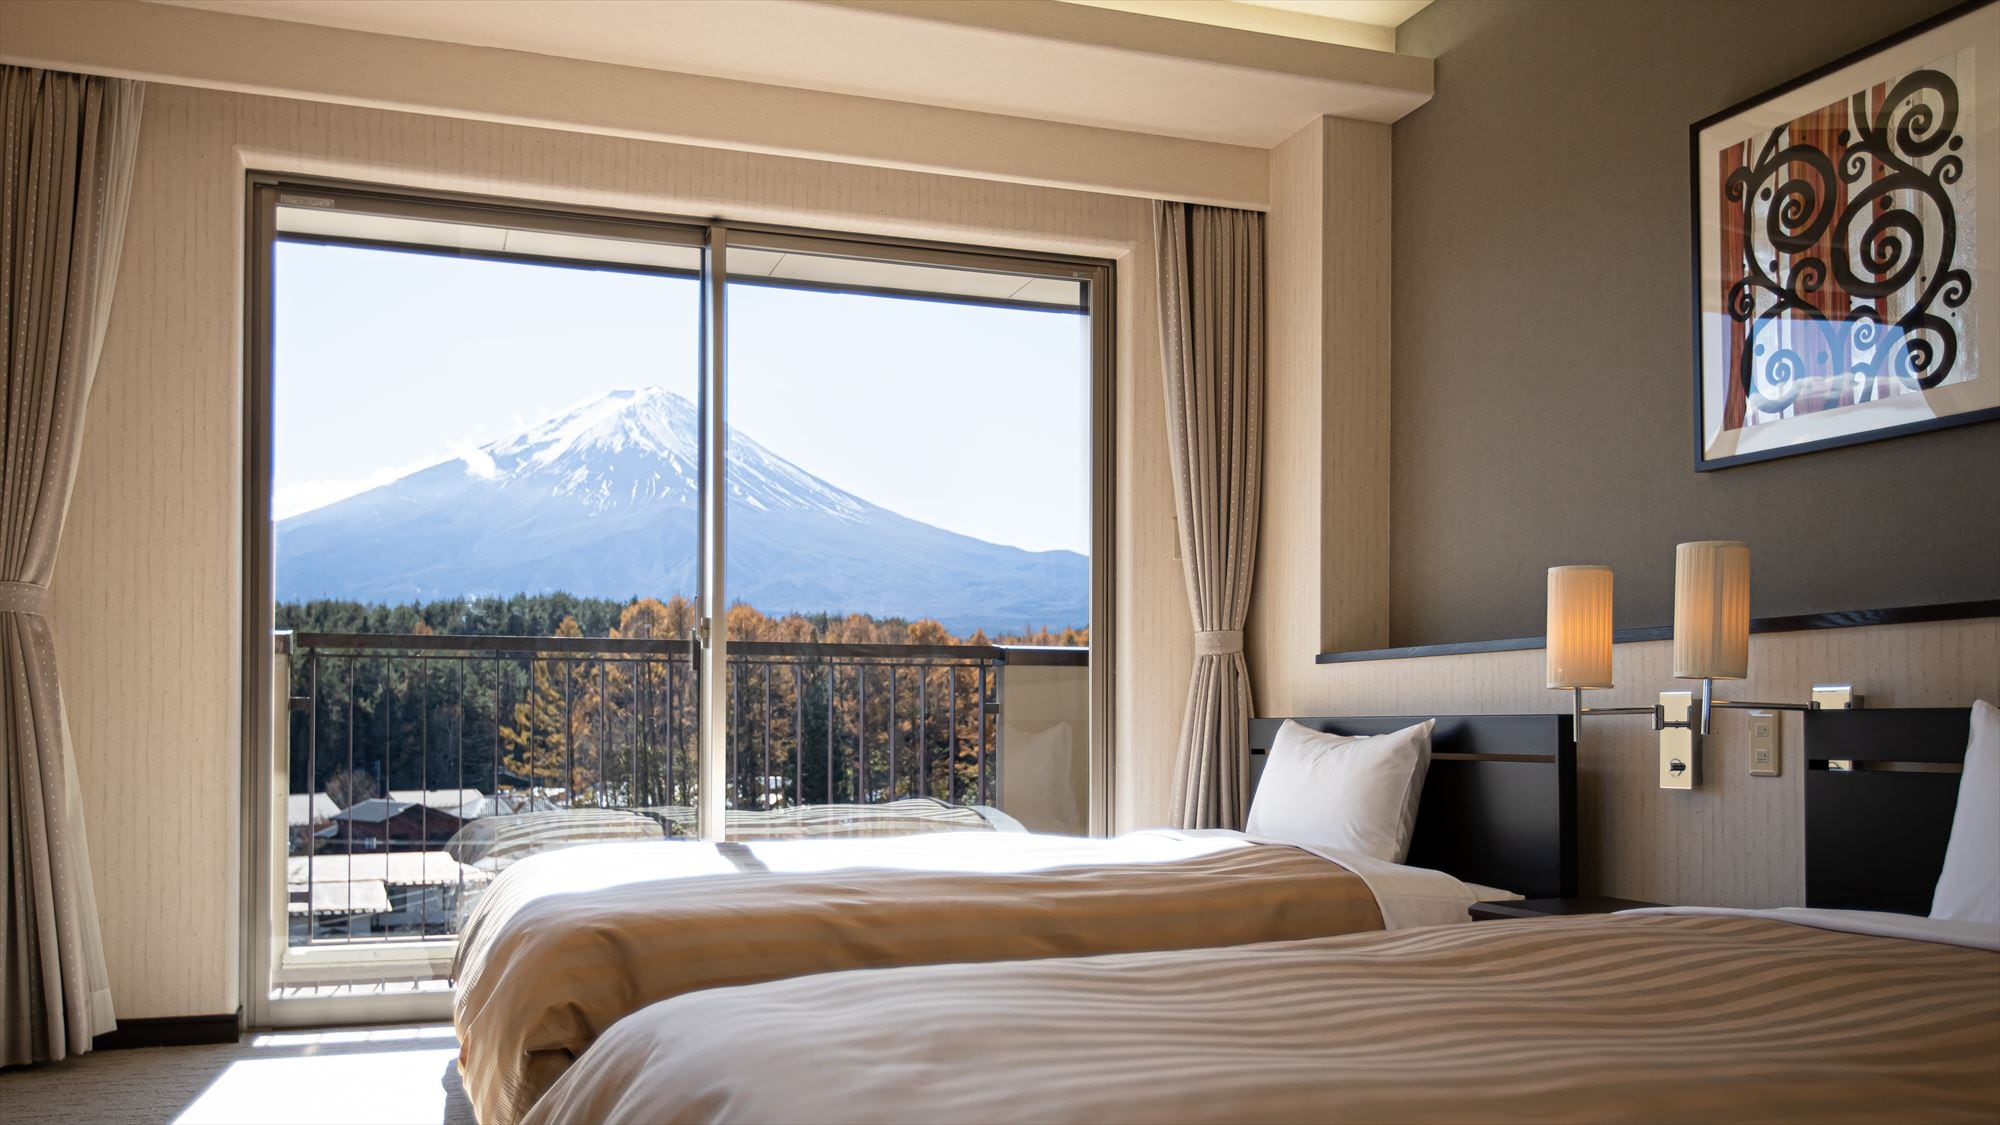 Mt. Fuji seen from the special room (image)